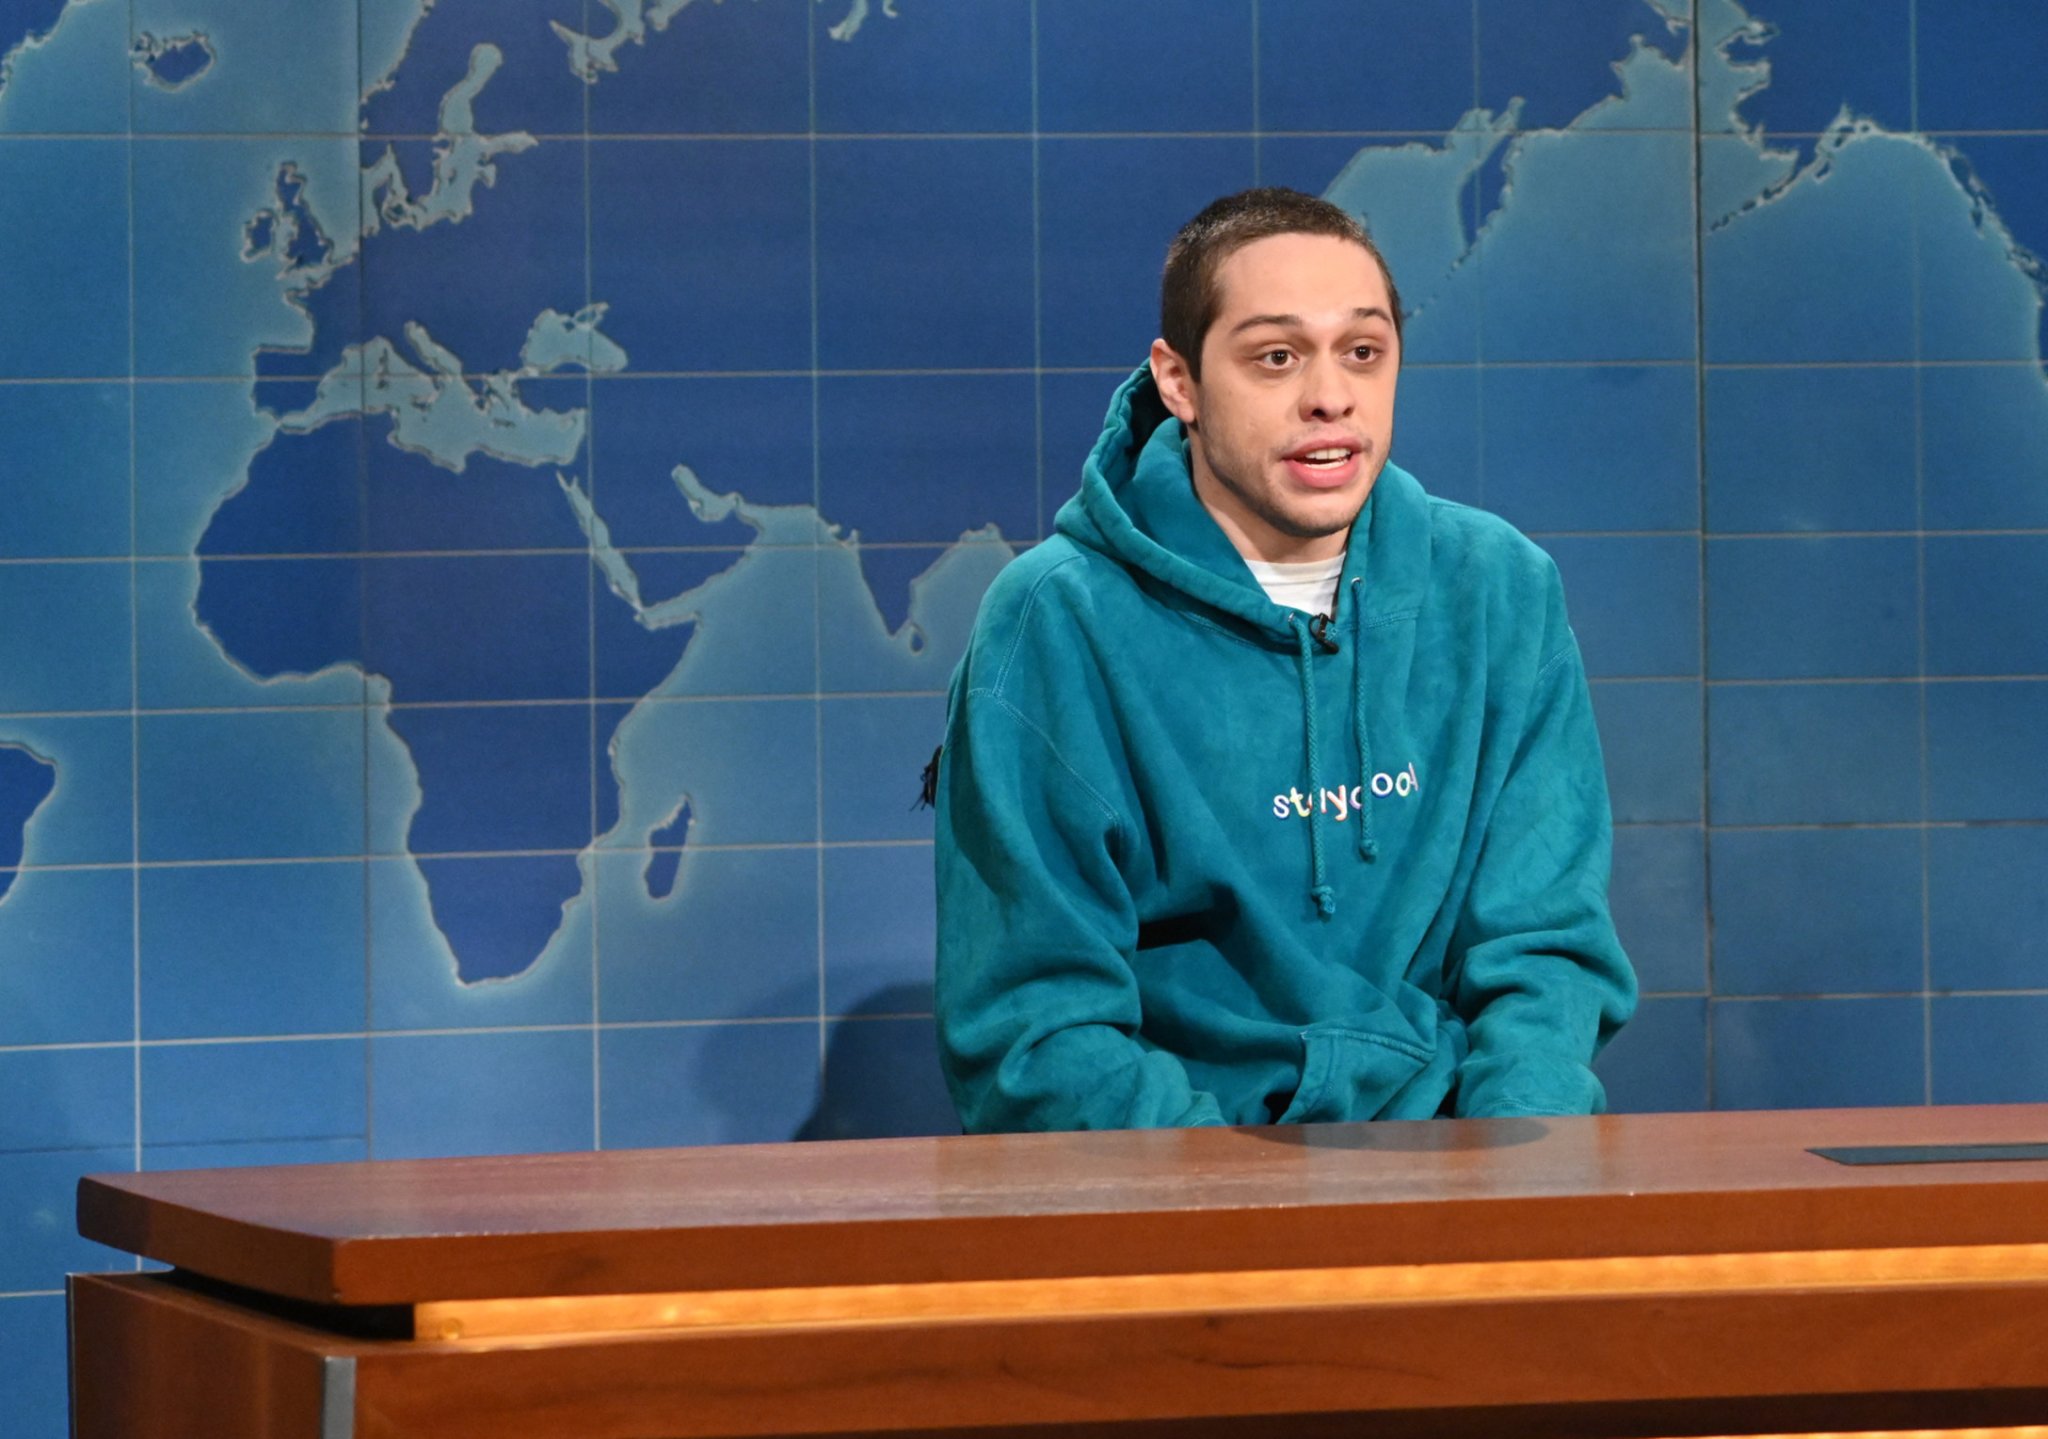 Why Pete Davidson has 'SNL' cast fuming behind the scenes